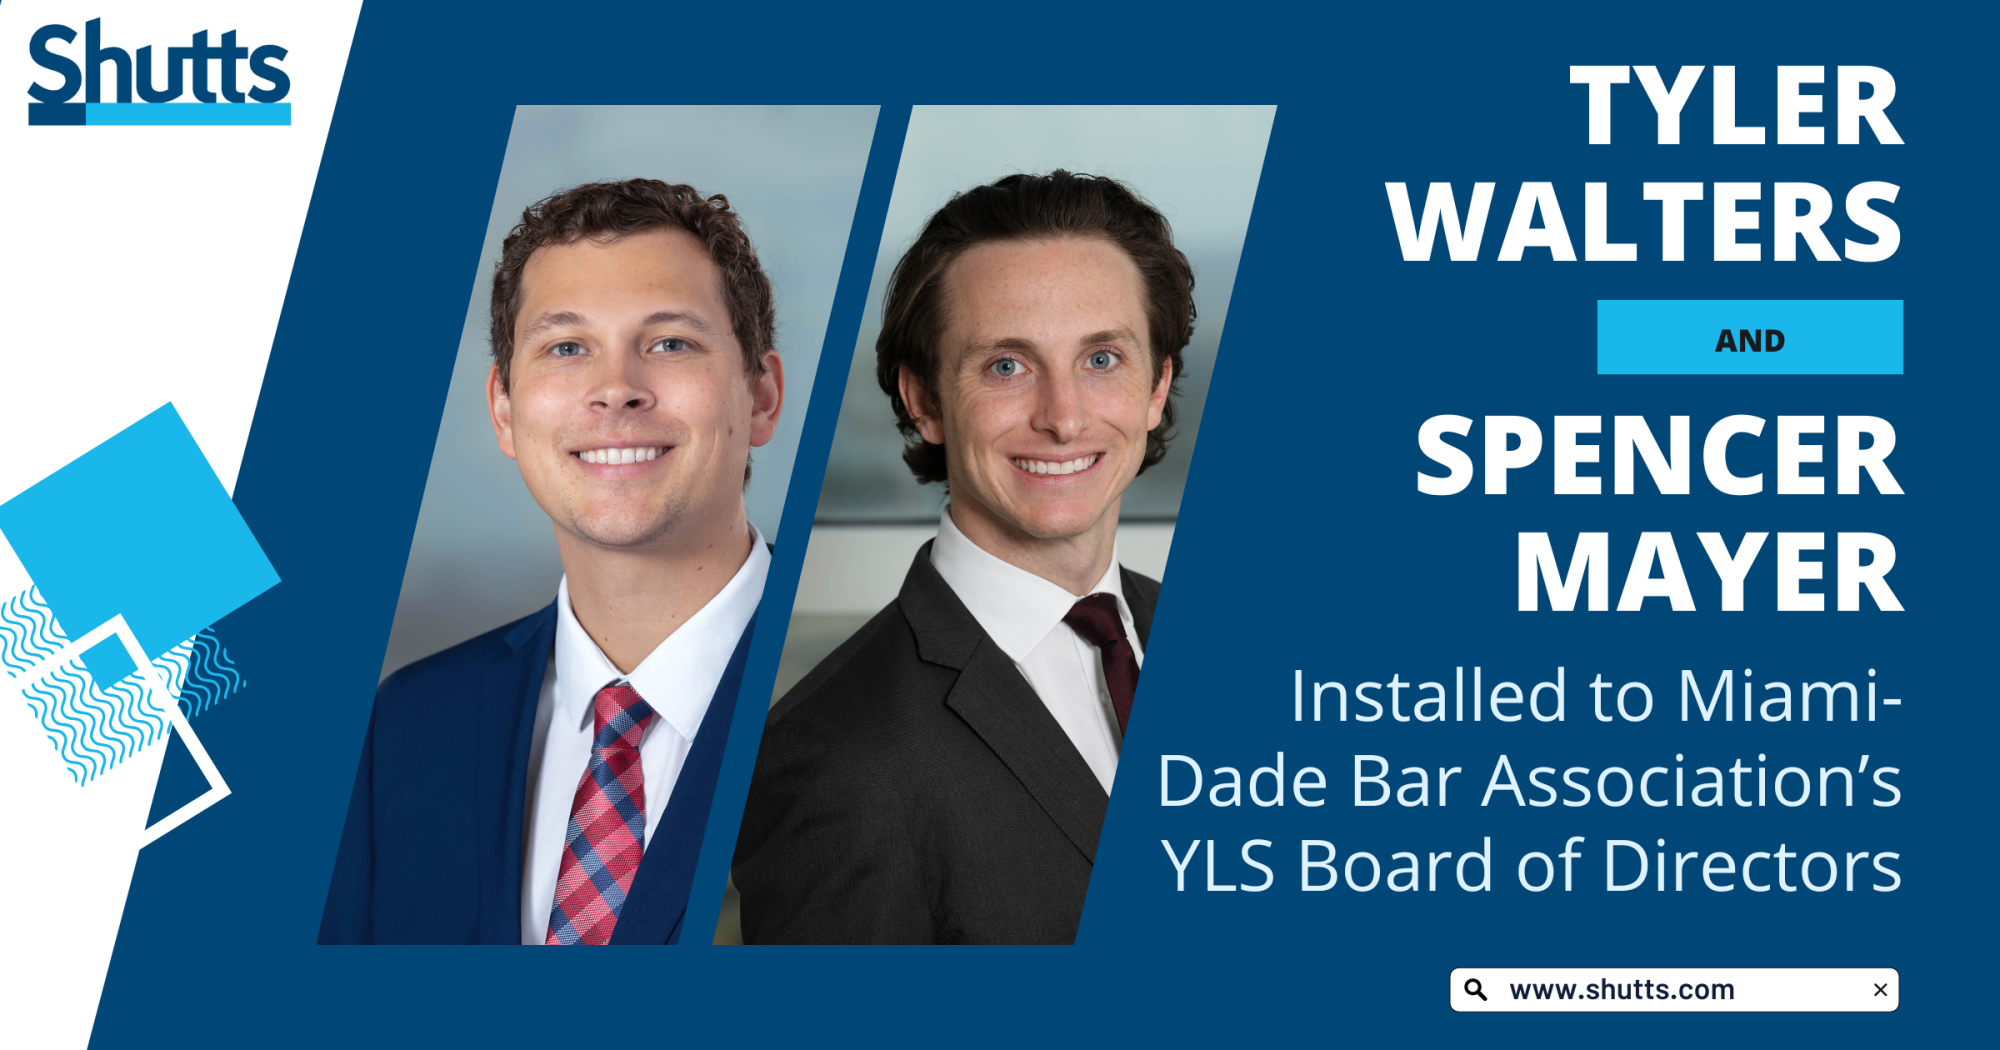 Tyler Walters and Spencer Mayer Installed to Miami-Dade Bar Association’s YLS Board of Directors